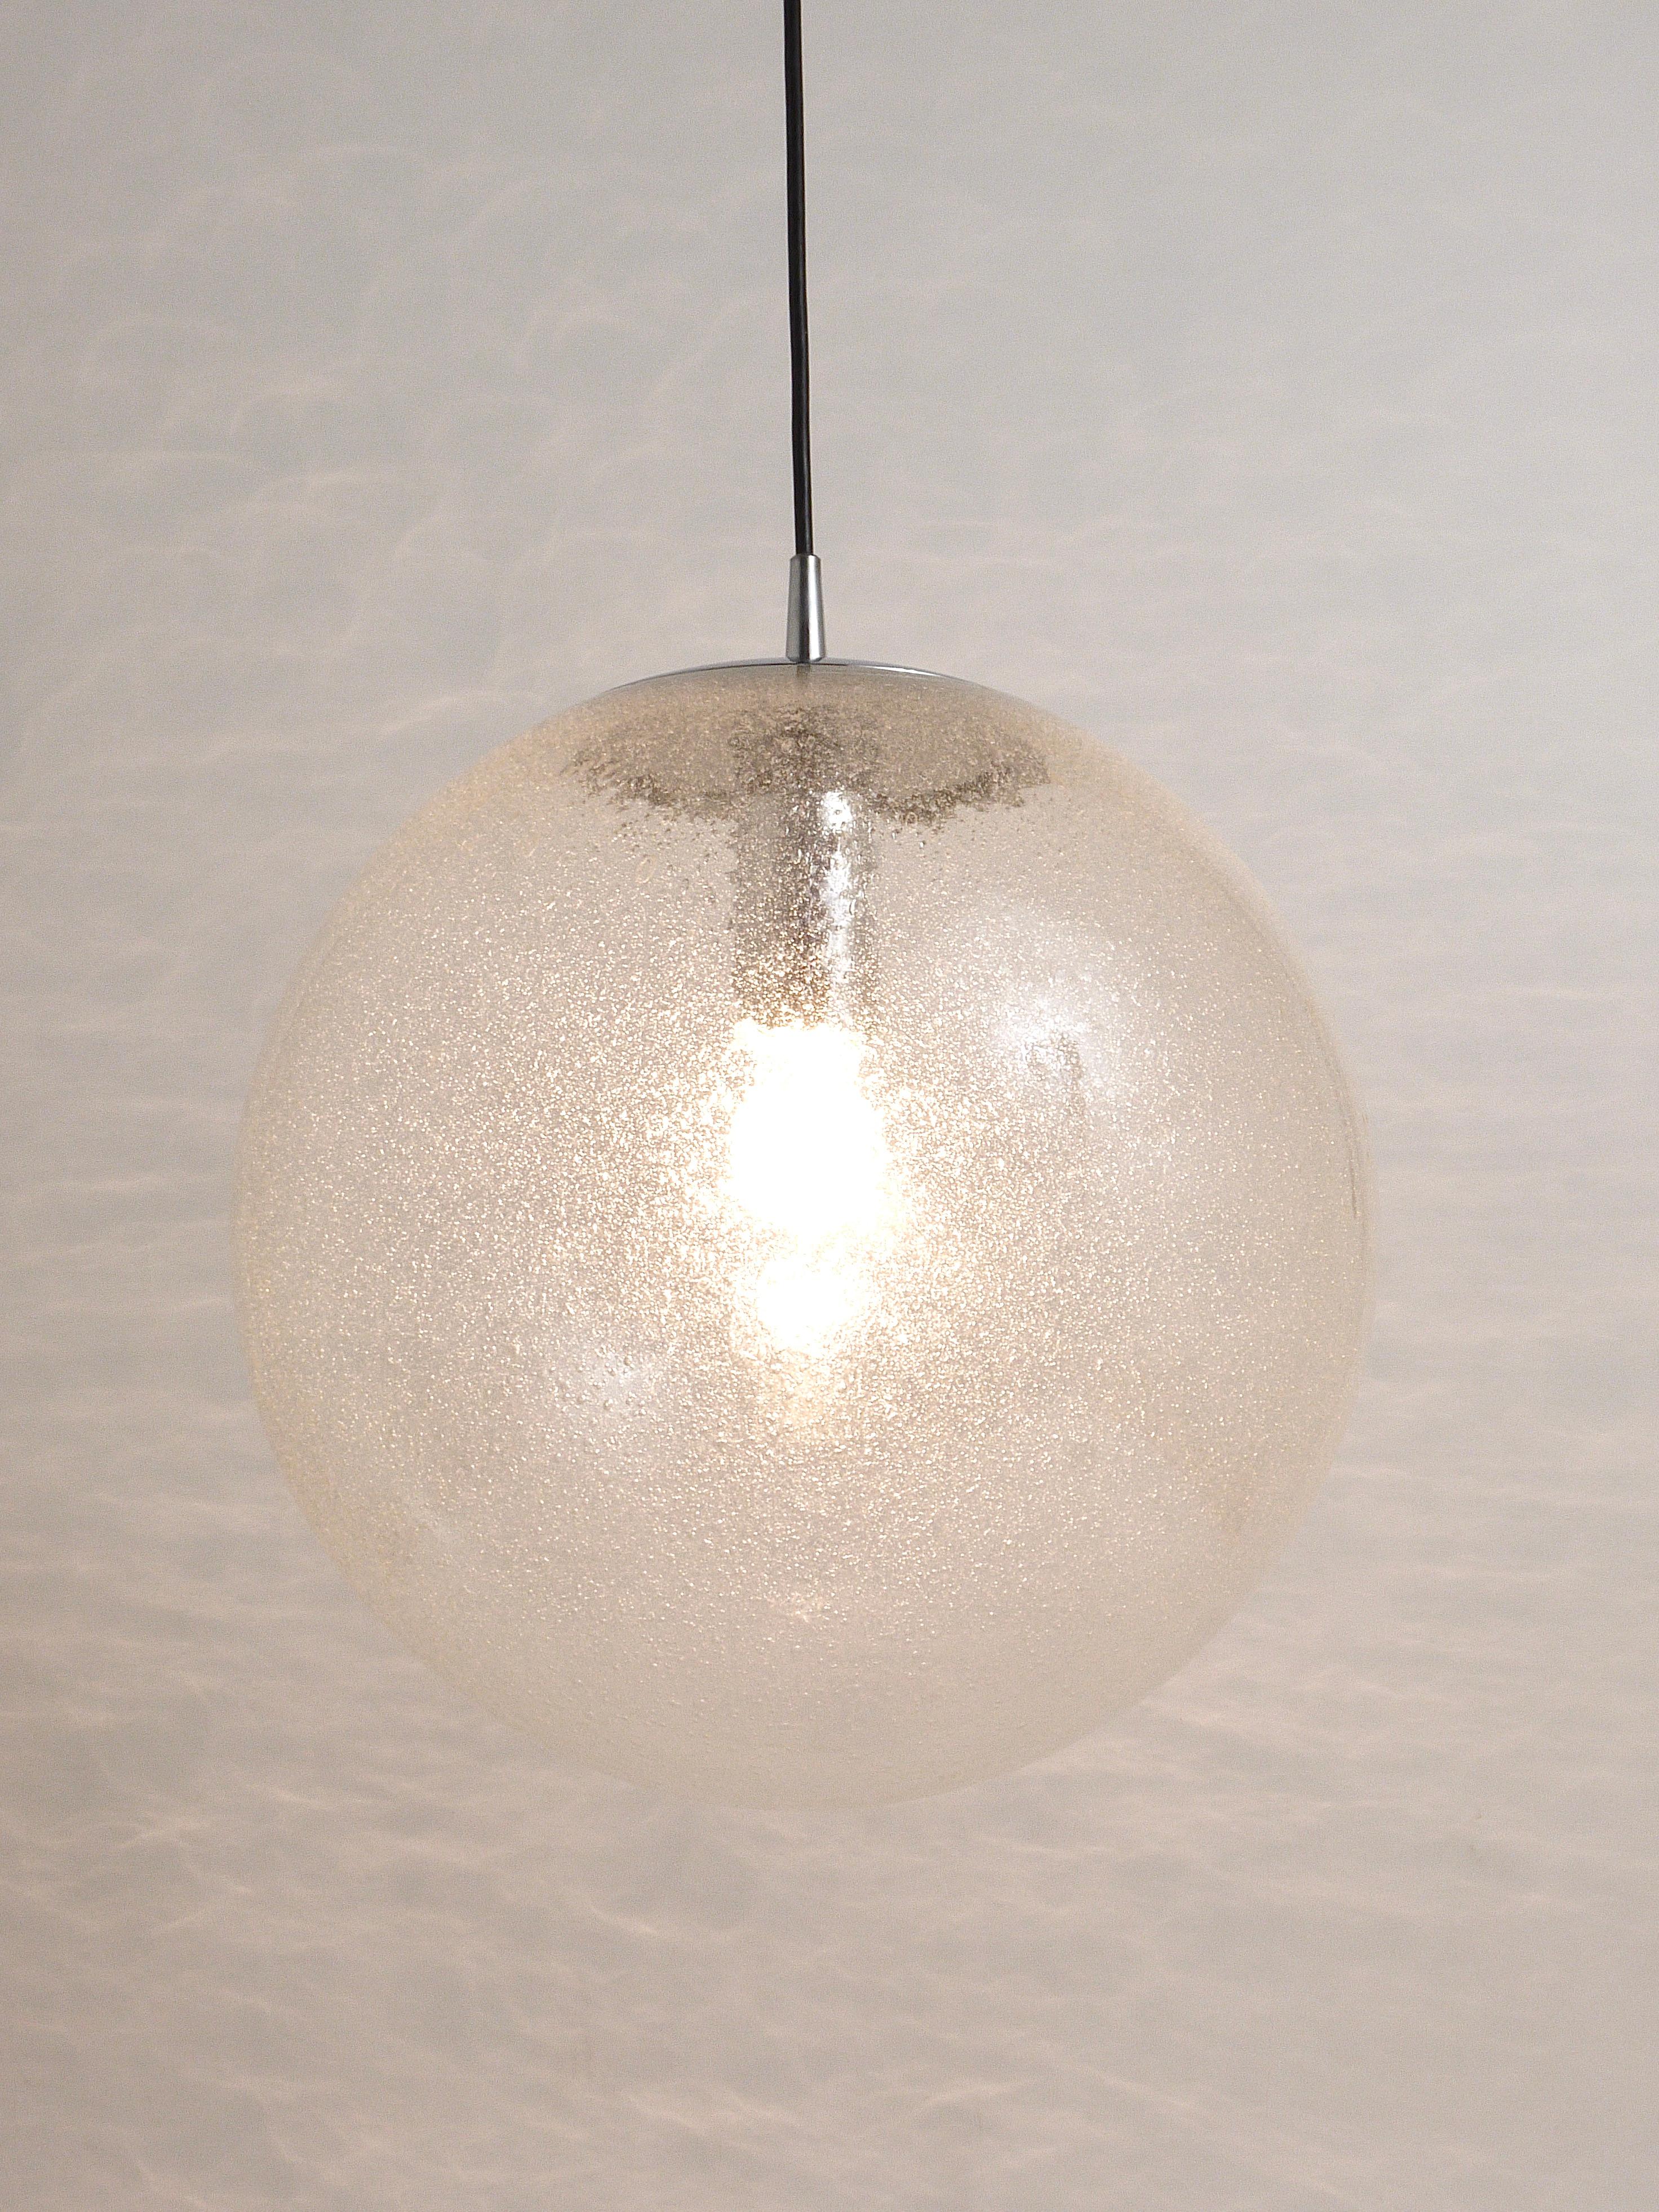 Large Peil & Putzler Bubble Glass and Chrome Globe Pendant Lamp, Germany, 1970s For Sale 10